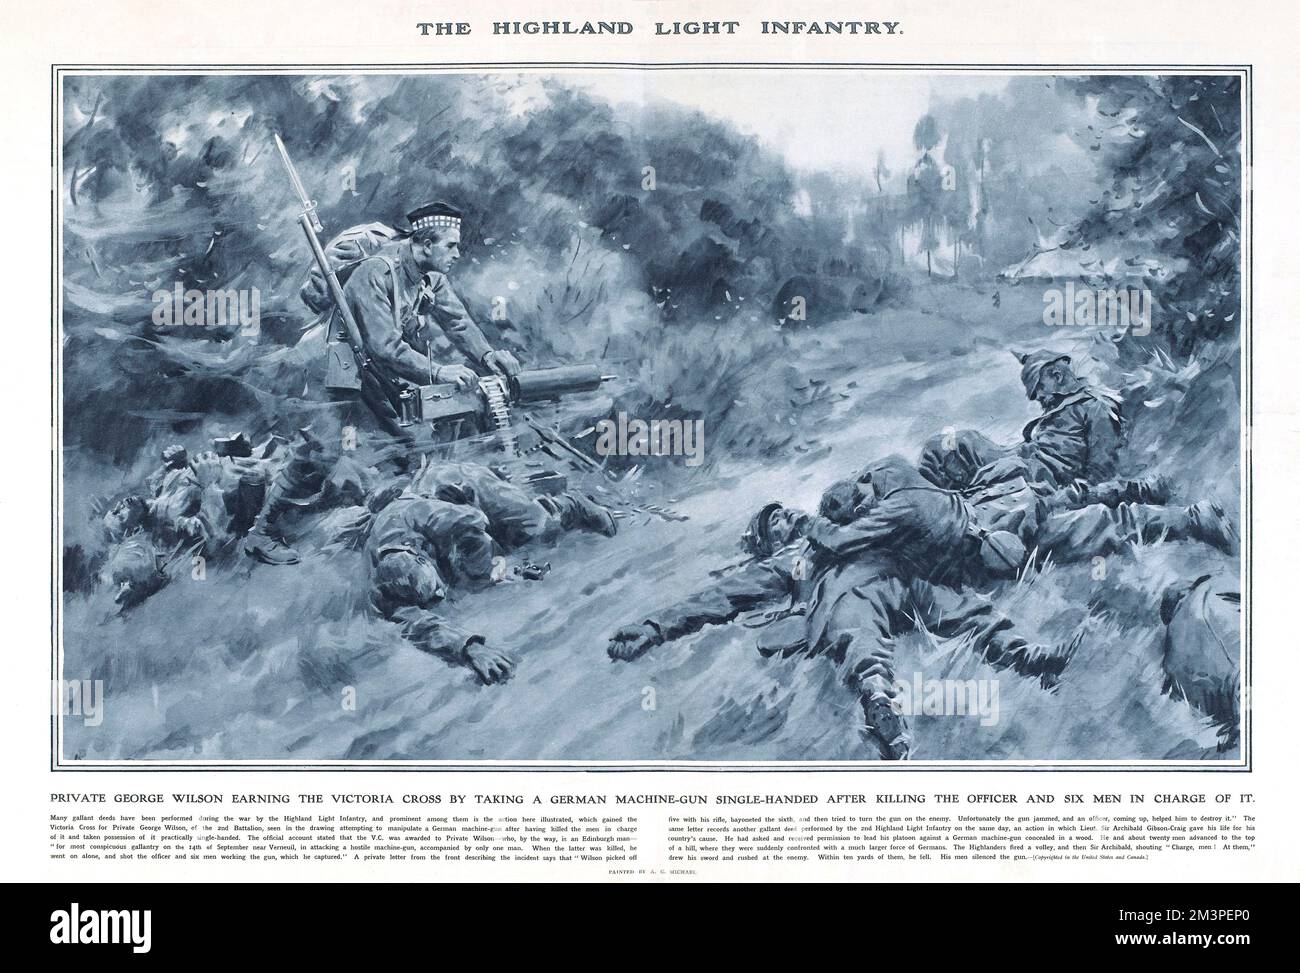 Private George Wilson of the Highland Light Infantry earning the Victoria Cross by taking a German machine gun single-handed after killing the officer and six men in charge of it.  Reproduction of a painting by A C Michael in Great War Deeds, a special panorama supplement produced by the Illustrated London News in 1915, featuring heroic actions of the First World War.      Date: 1915 Stock Photo